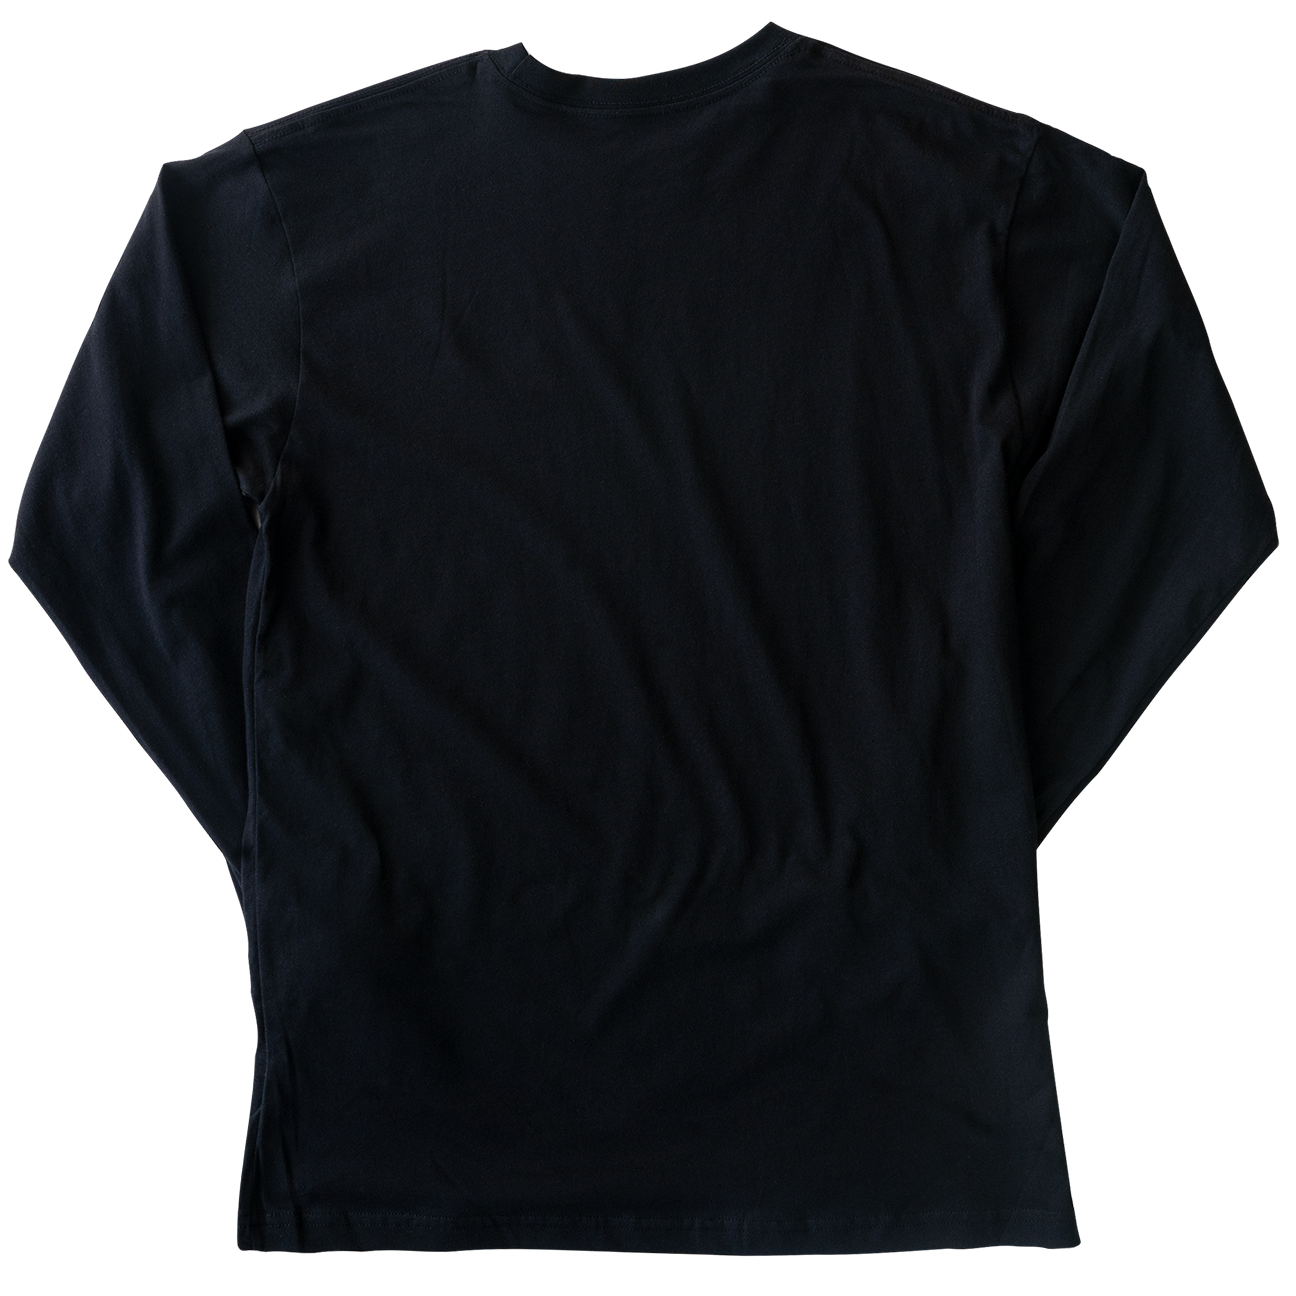 Nature Backs Long Sleeve 100% Organic Cotton T-Shirt | Minimalist Black Long Sleeve made with Eco-Friendly Fibers Sustainably made in the USA 